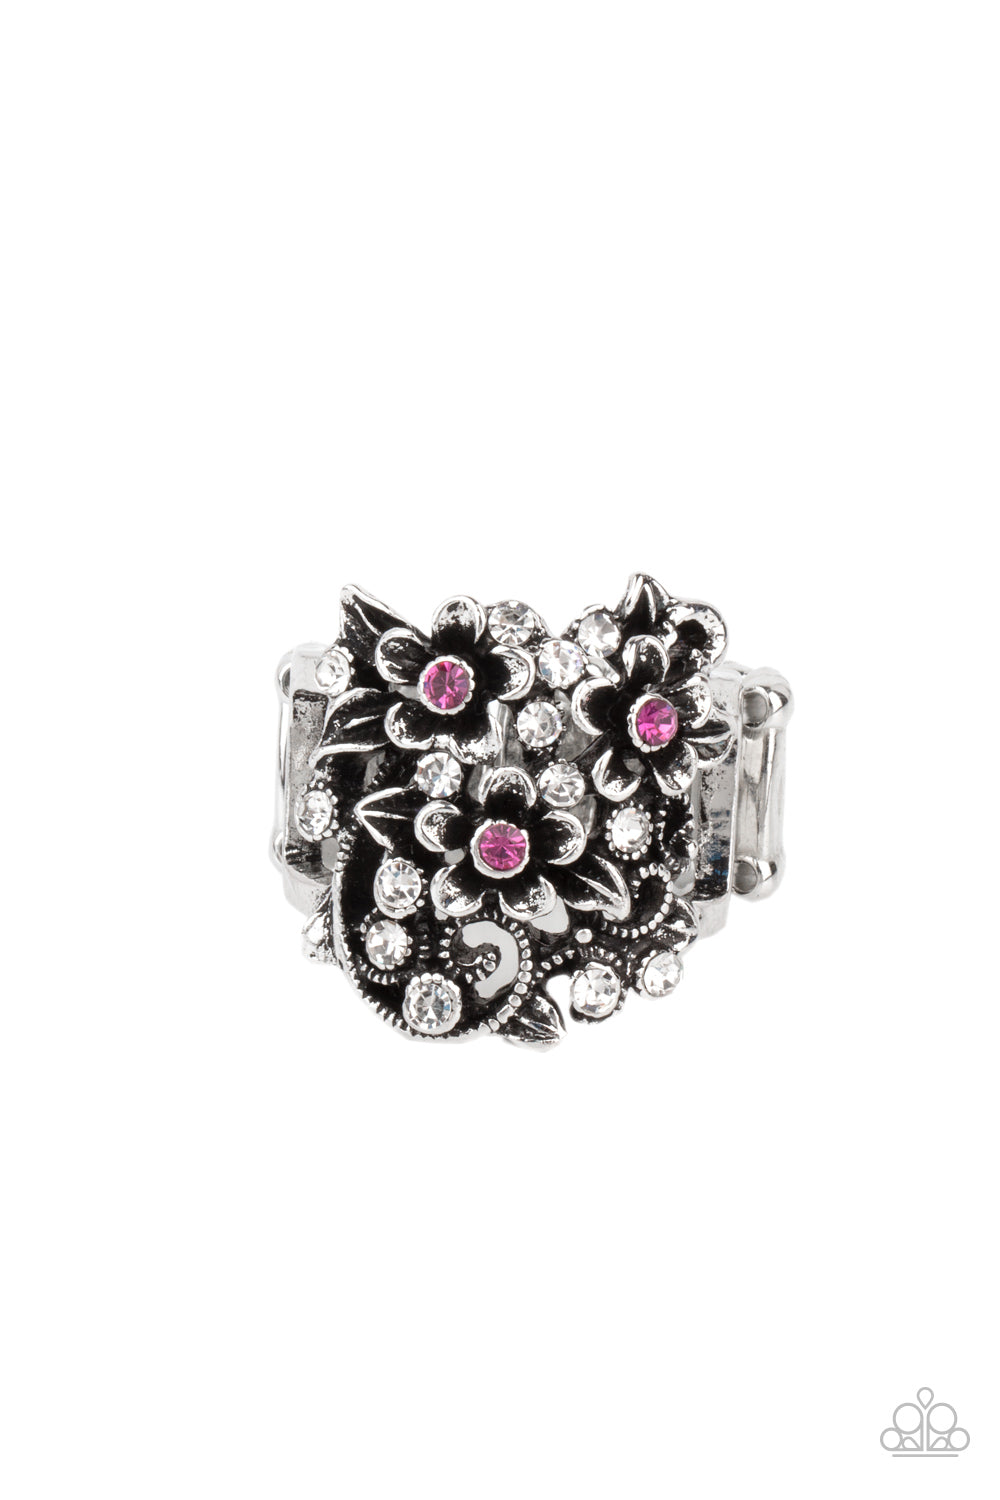 Perfectly Perennial Pink Ring - Paparazzi Accessories  Dotted with dainty pink rhinestone centers, antiqued silver floral frames bloom atop a leafy backdrop of glassy white rhinestones. Features a stretchy band for a flexible fit.  All Paparazzi Accessories are lead free and nickel free!  Sold as one individual ring.